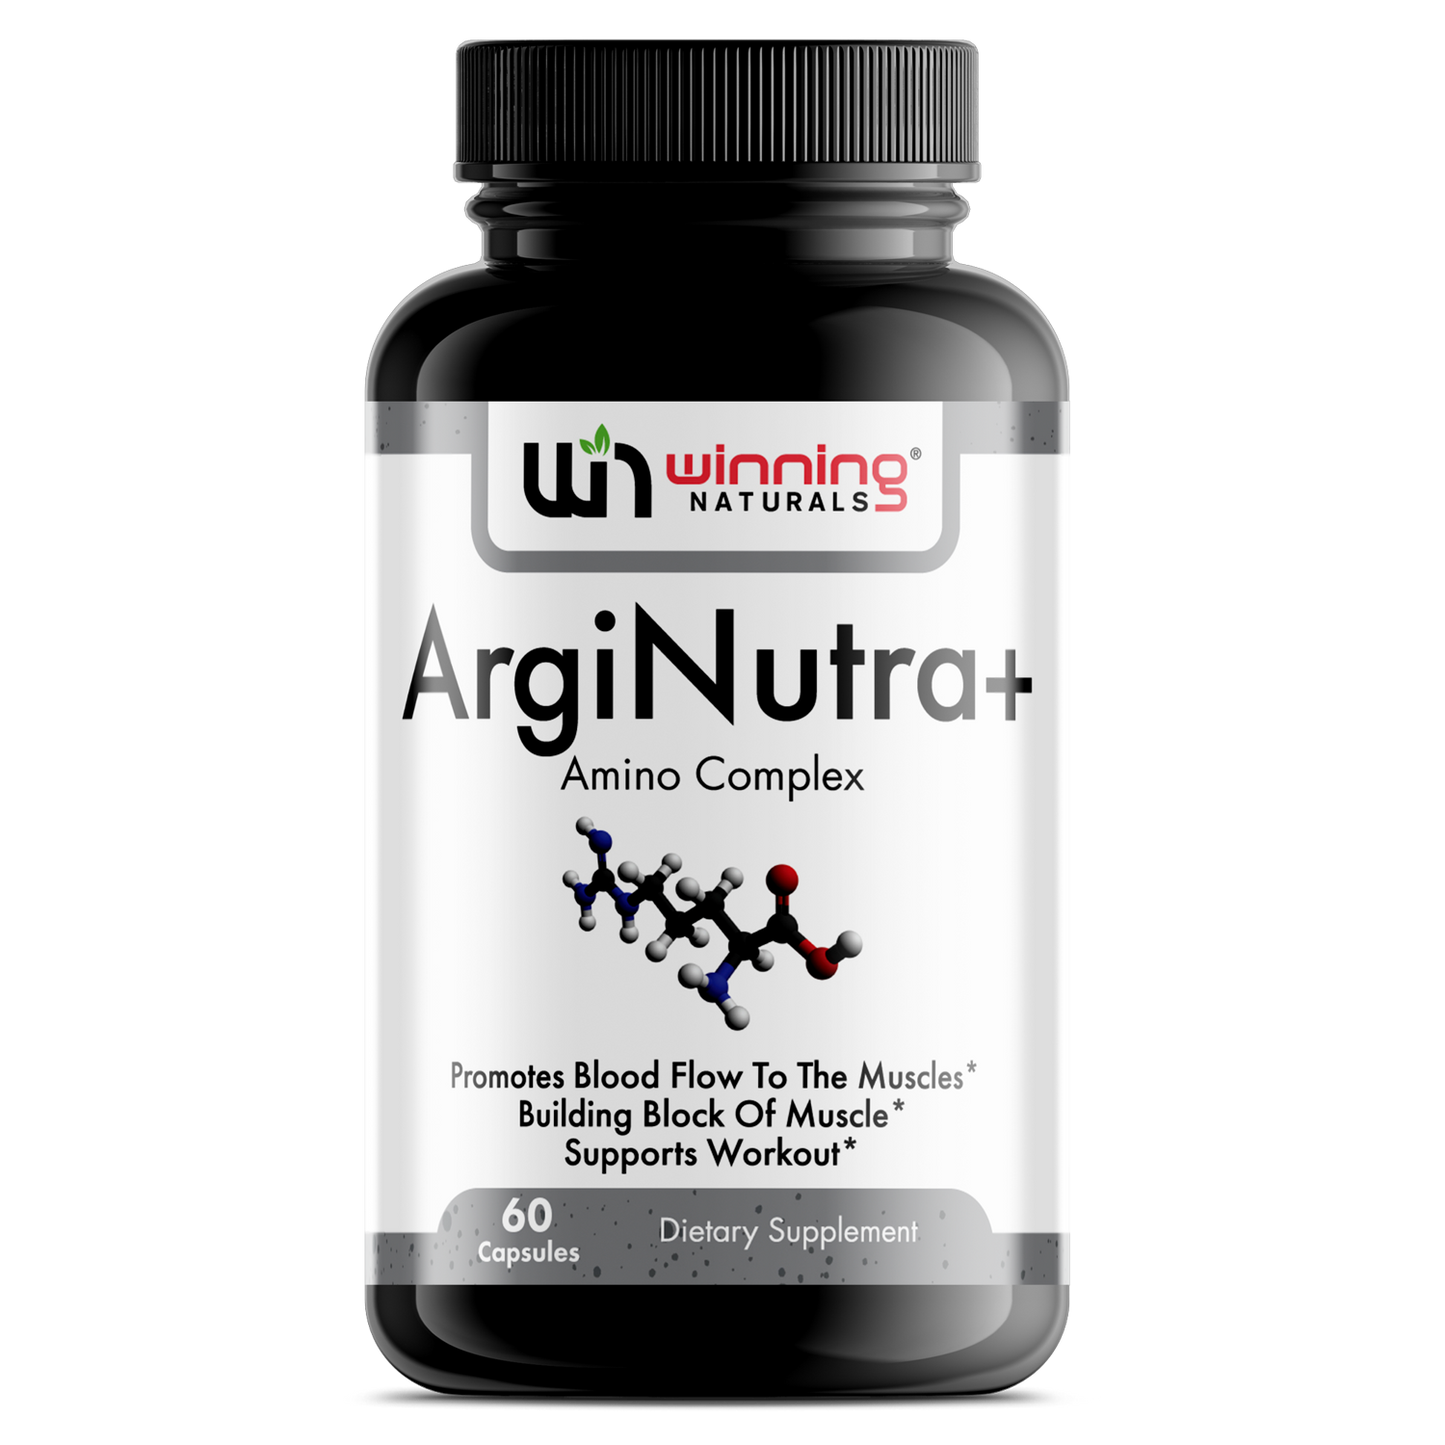 ArgiNutra Amino Complex - Enhance Muscle Growth, Endurance, and Performance - 60 Capsules